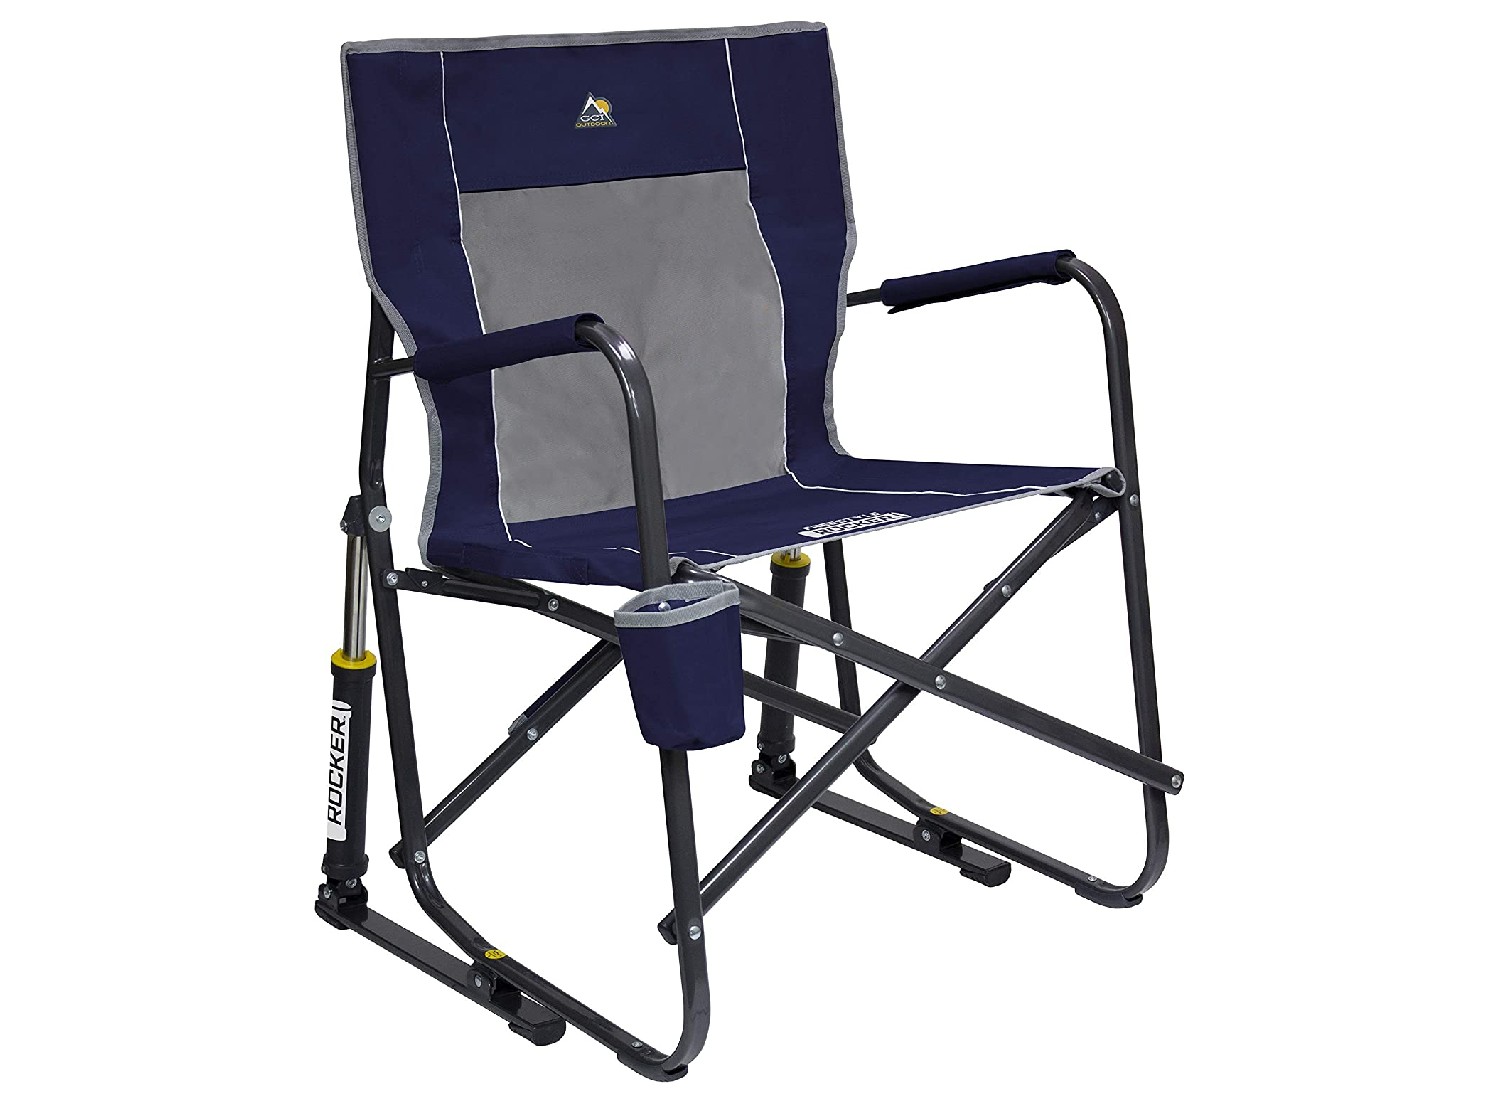 Best Outdoor Folding Chairs In 2021, What Is The Best Outdoor Chair